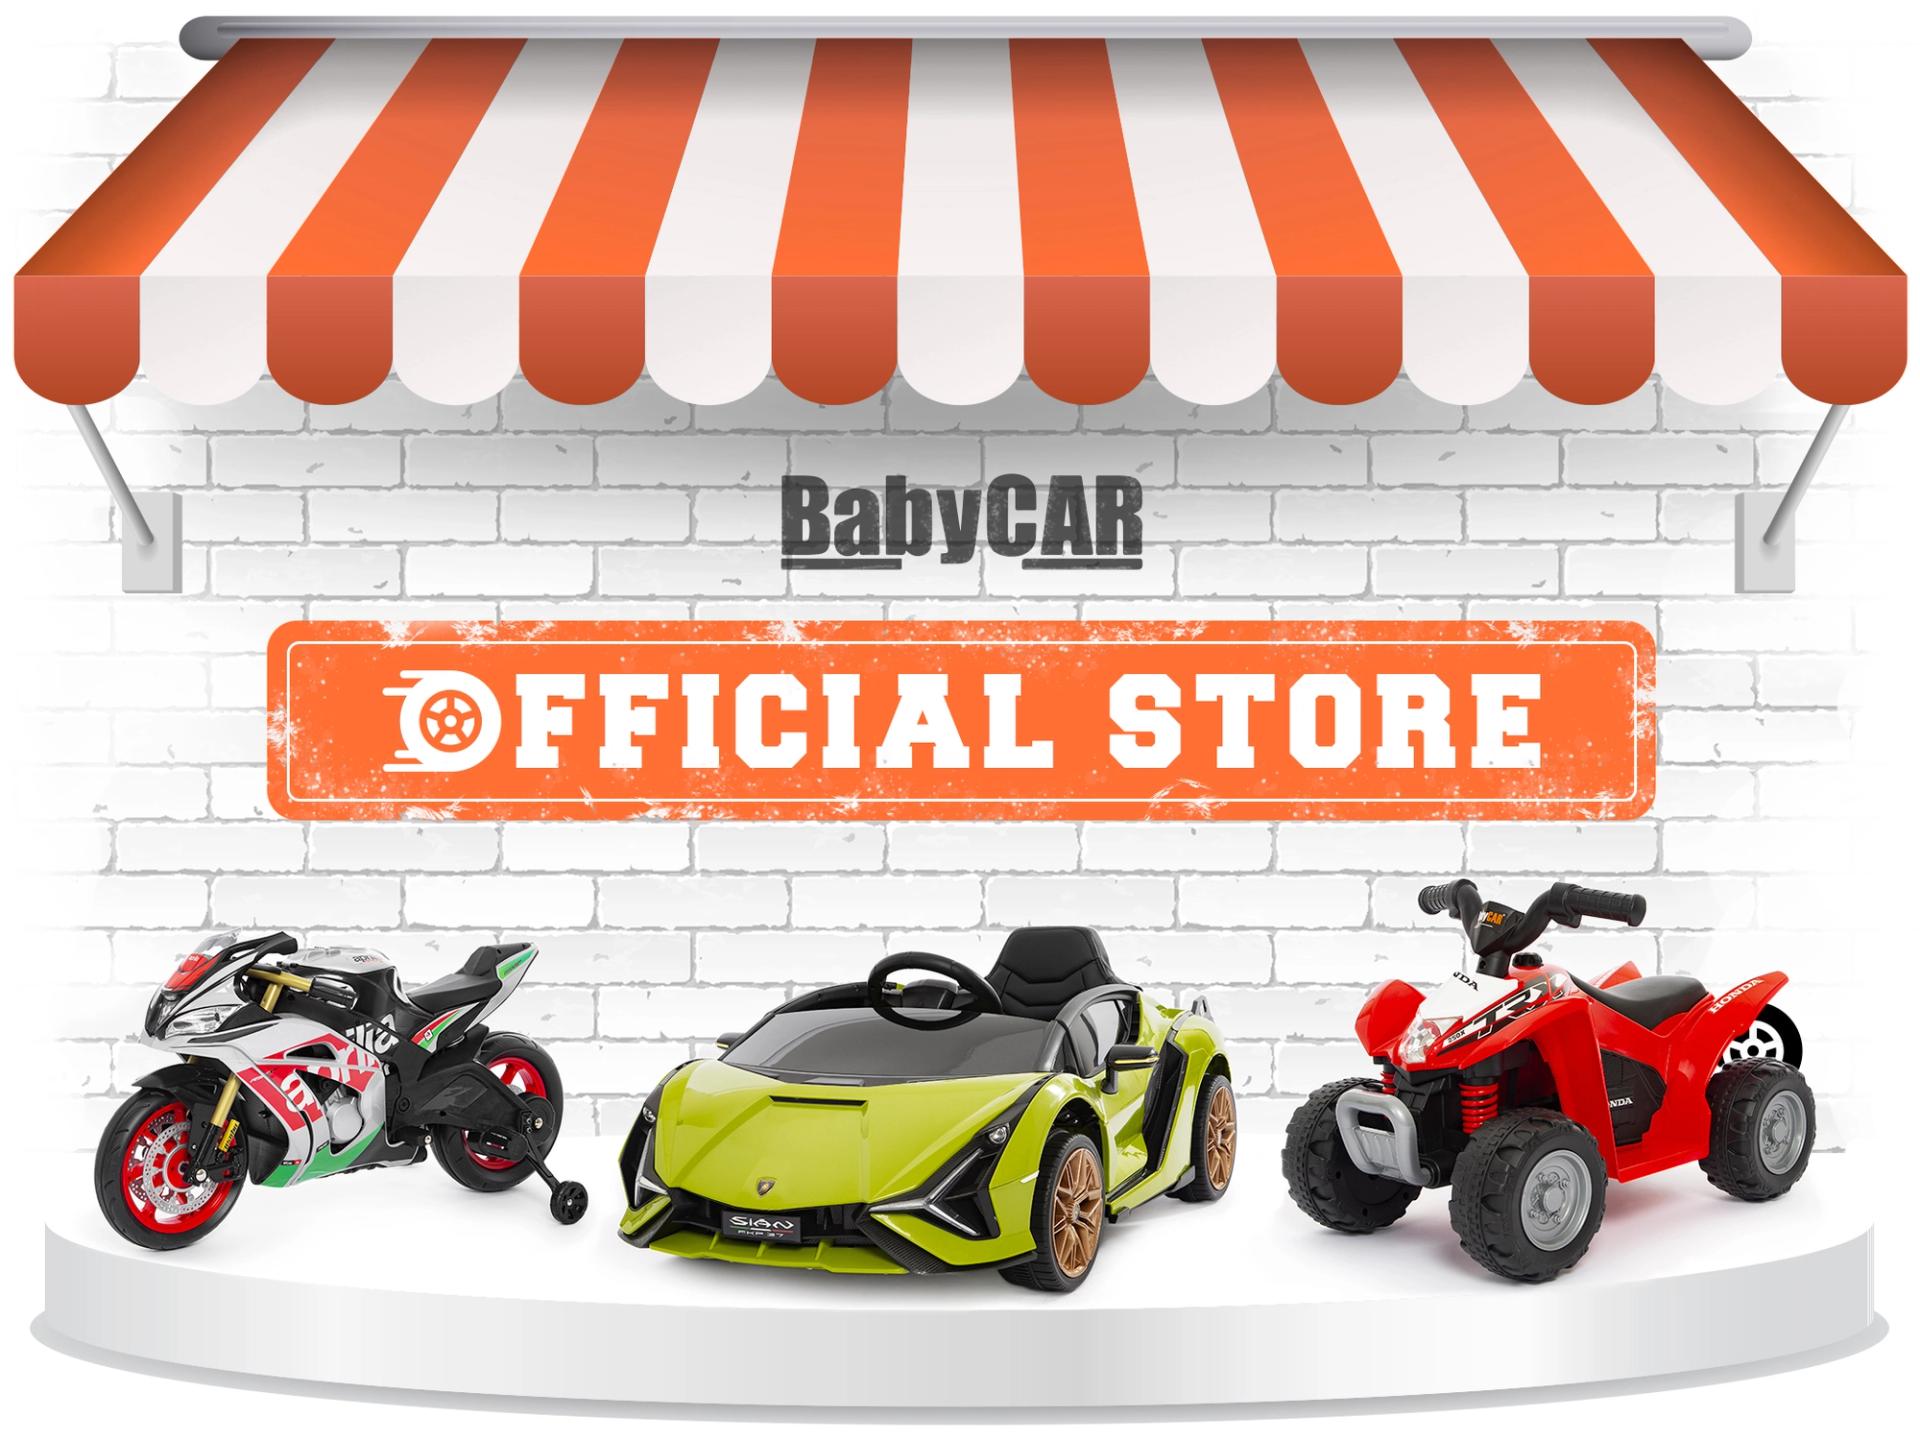 official store babycar